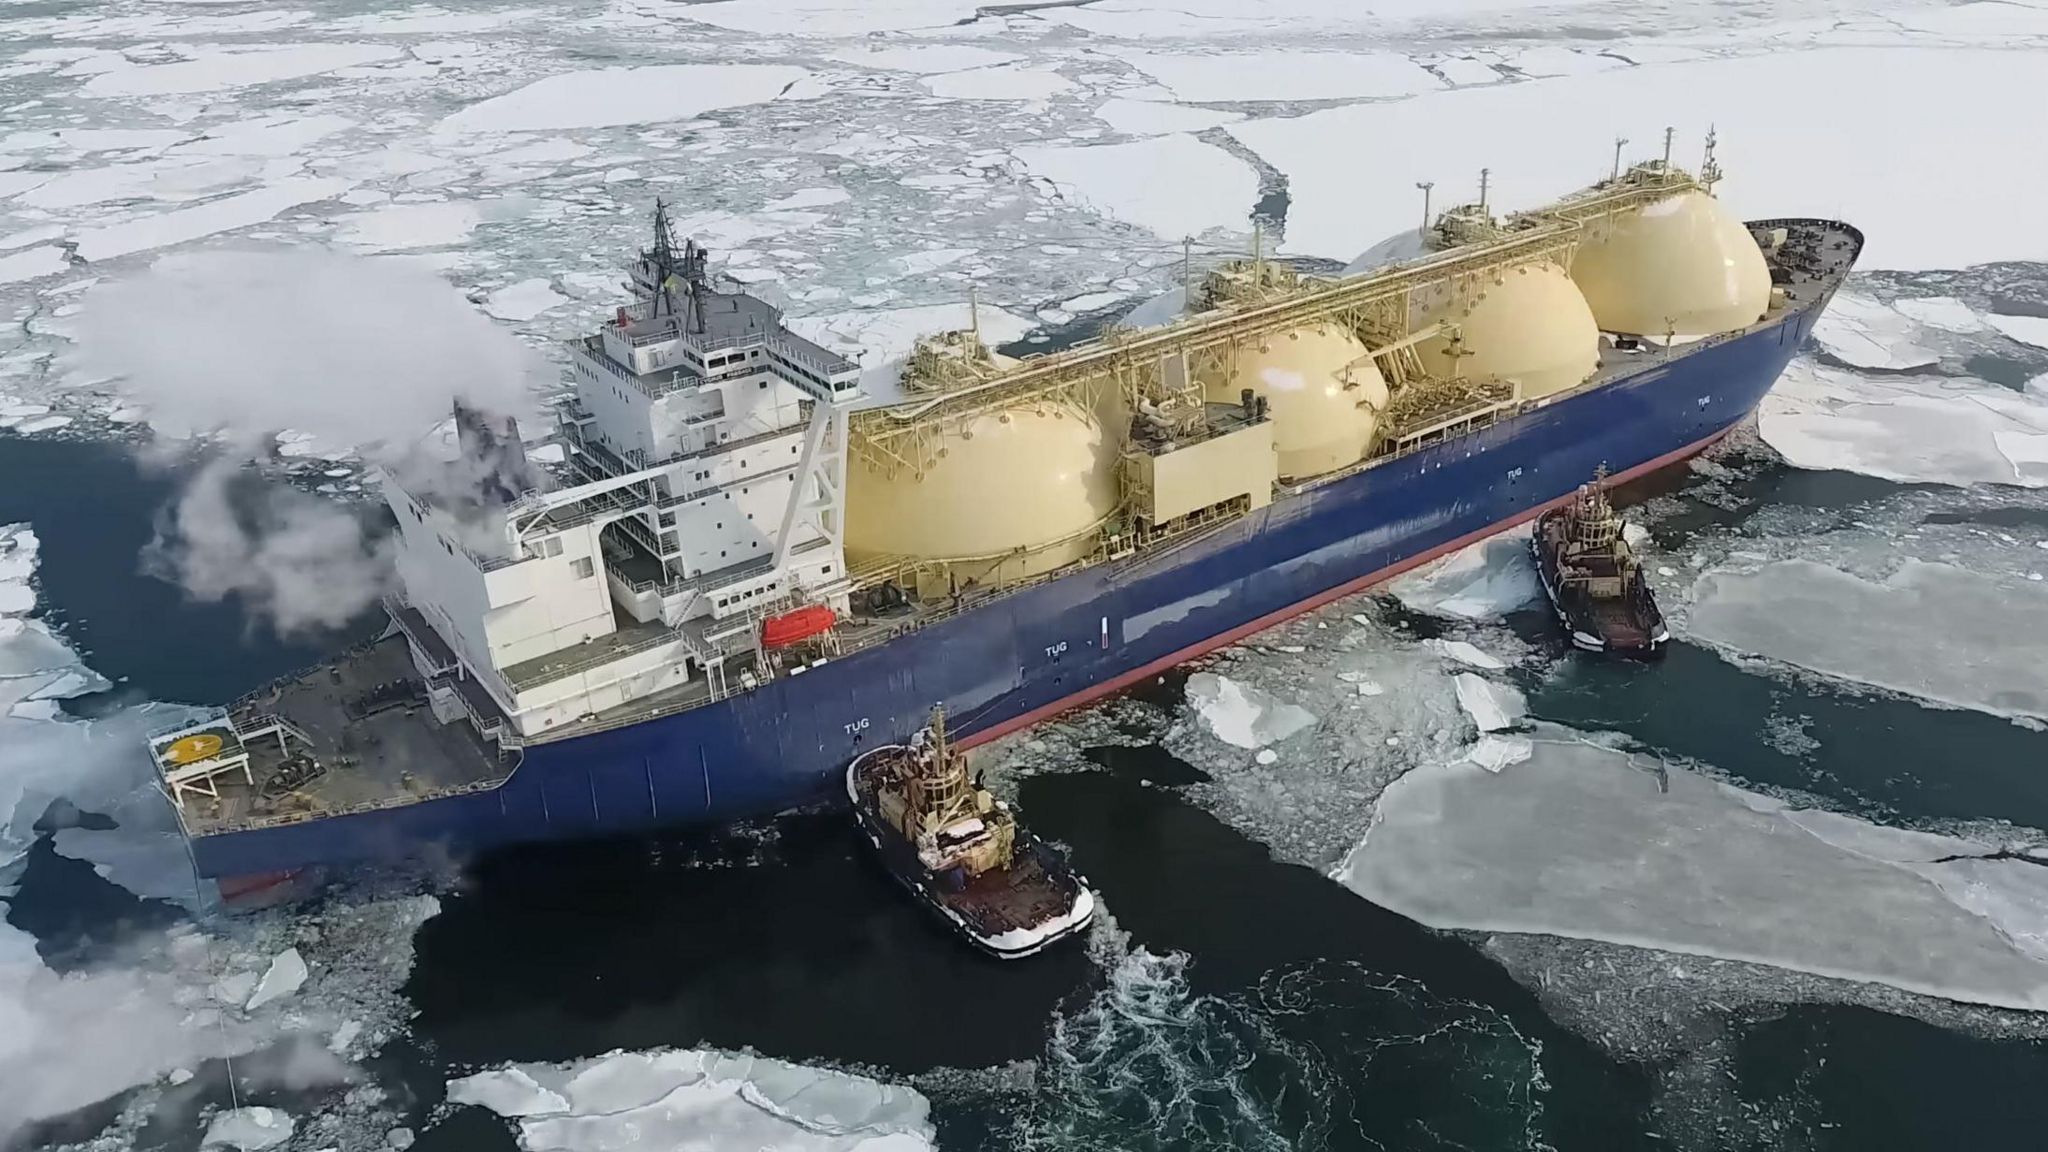 A ship in Arctic waters powered by tug boats